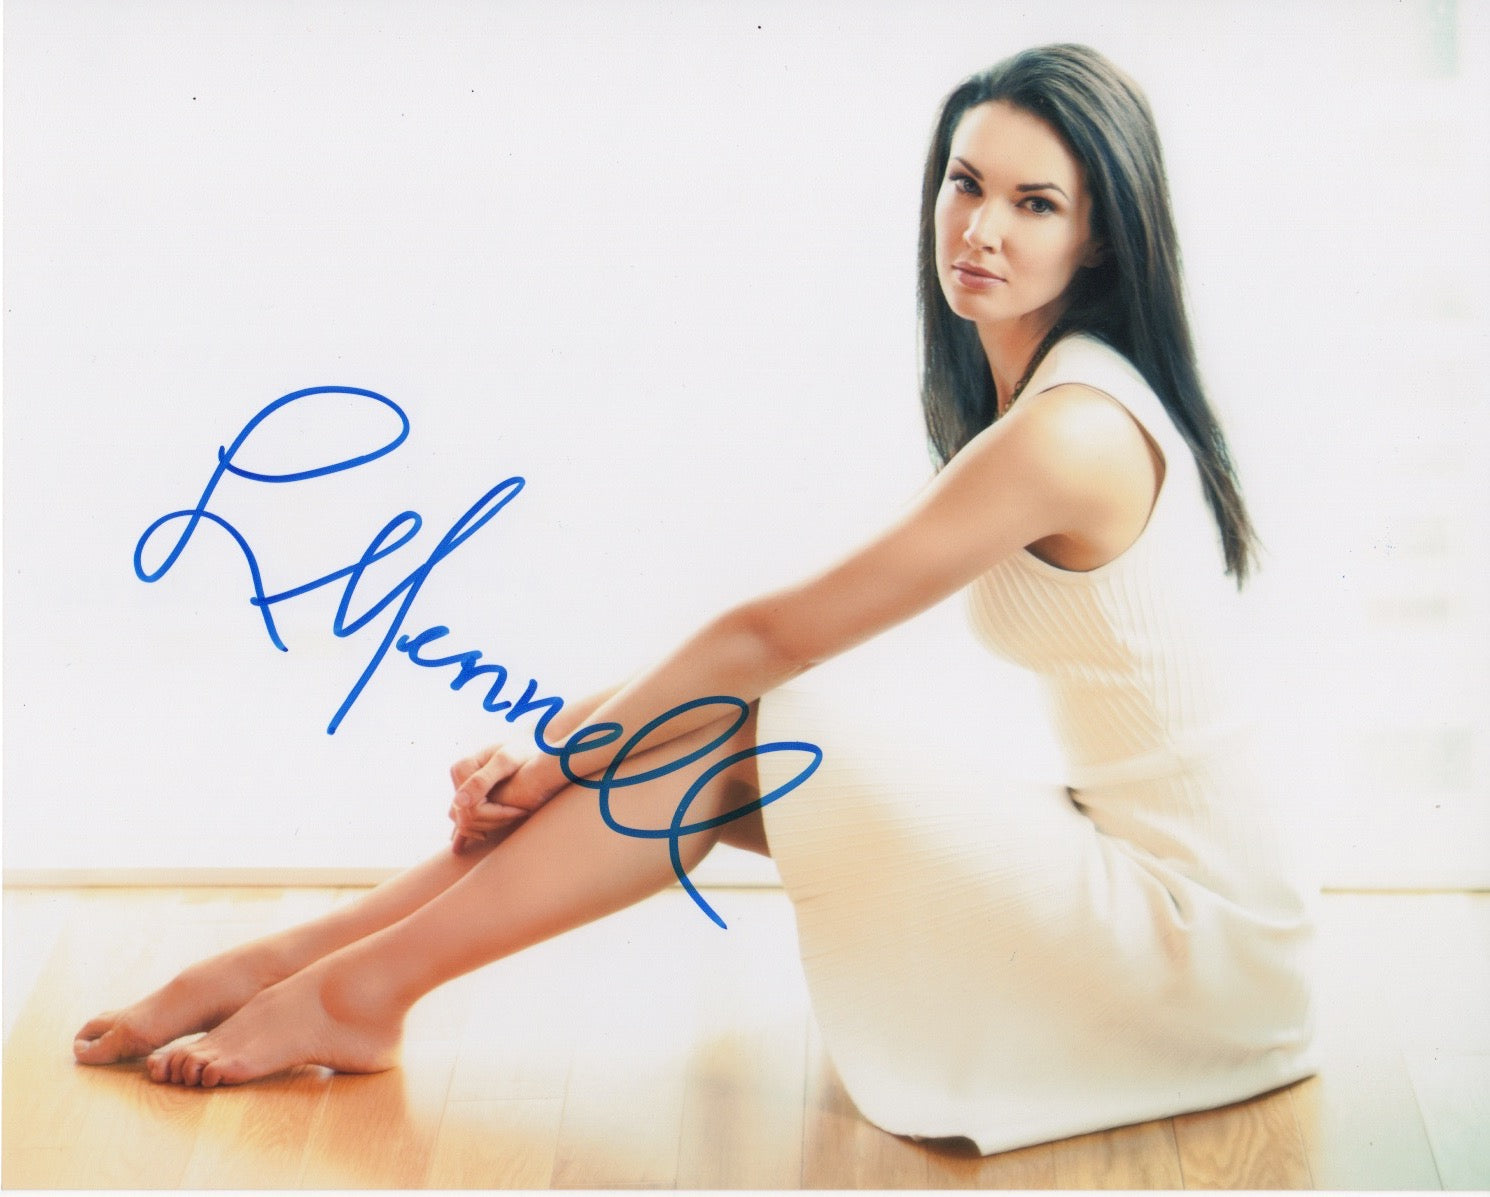 Laura Mennell Sexy Autograph Signed 8x10 Photo #5 - Outlaw Hobbies Authentic Autographs